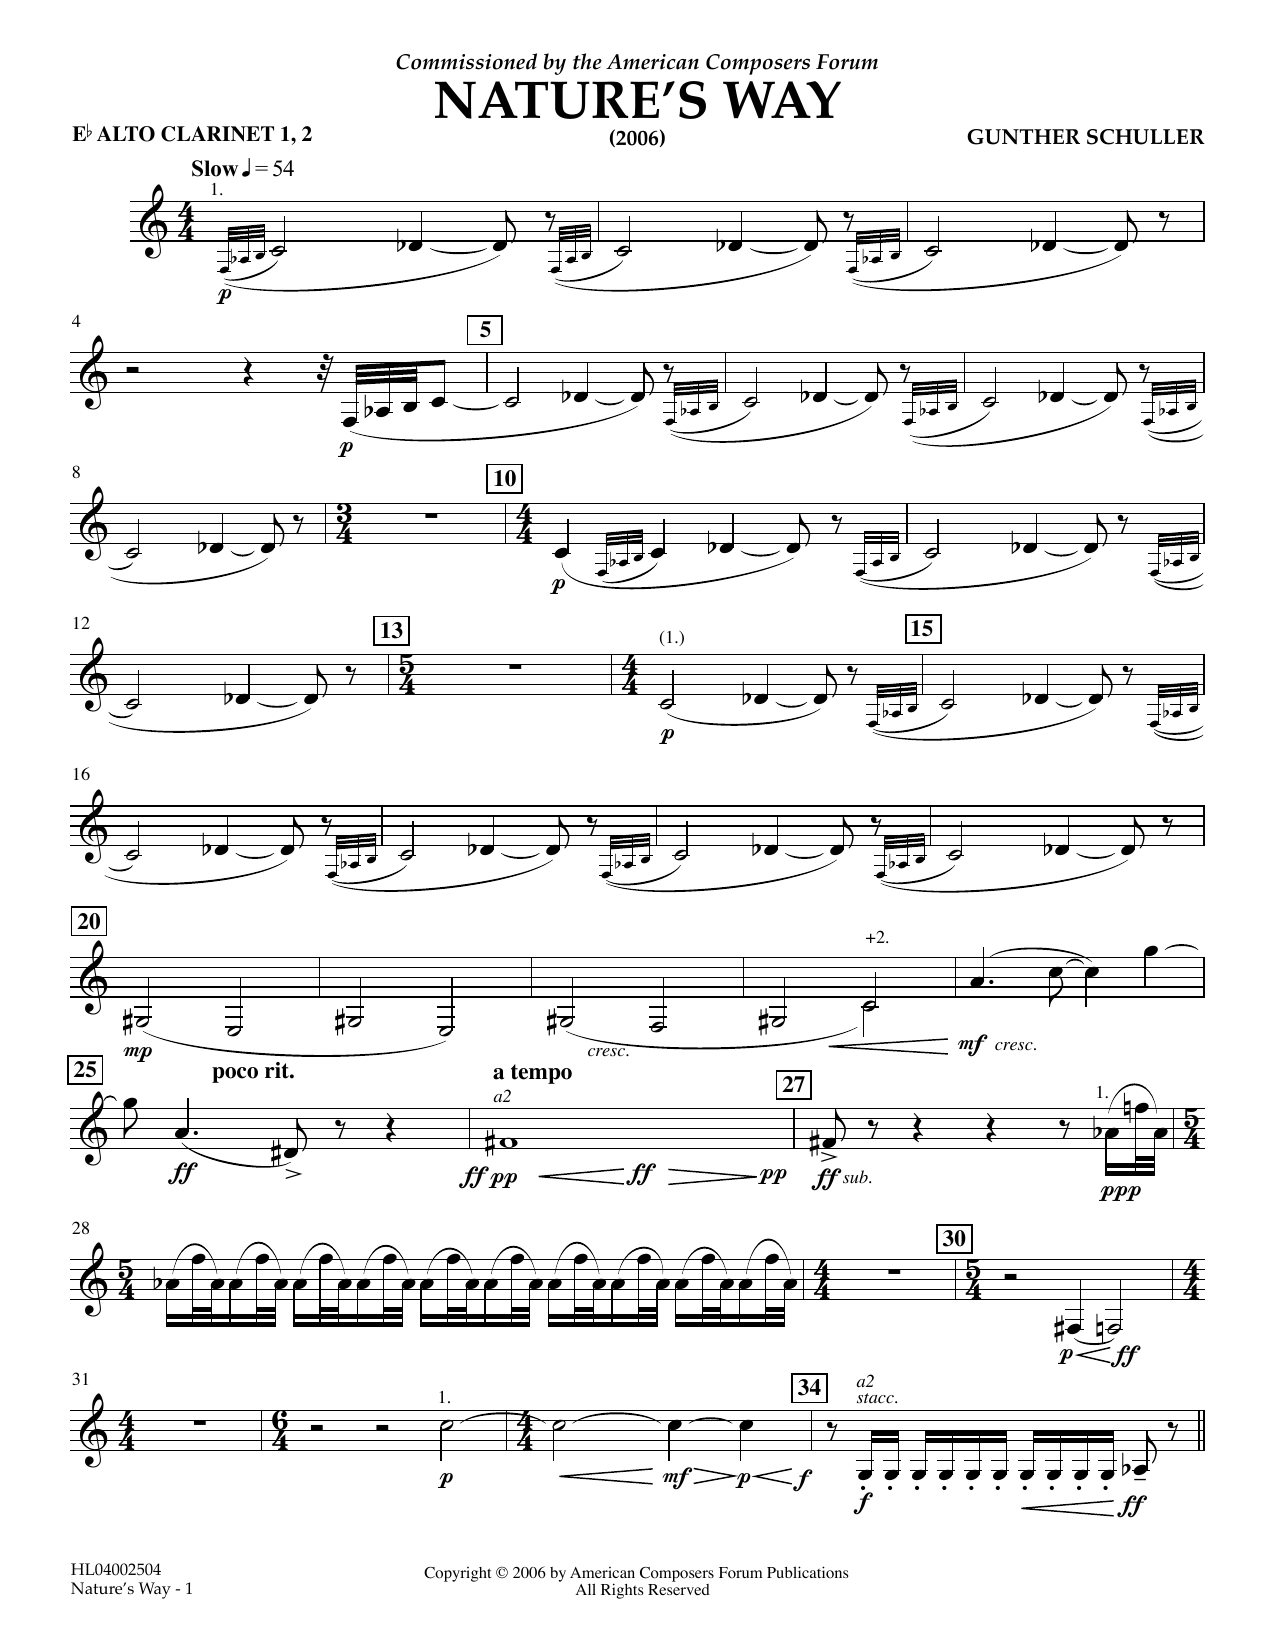 Download Gunther Schuller Nature's Way - Eb Alto Clarinet 1,2 Sheet Music